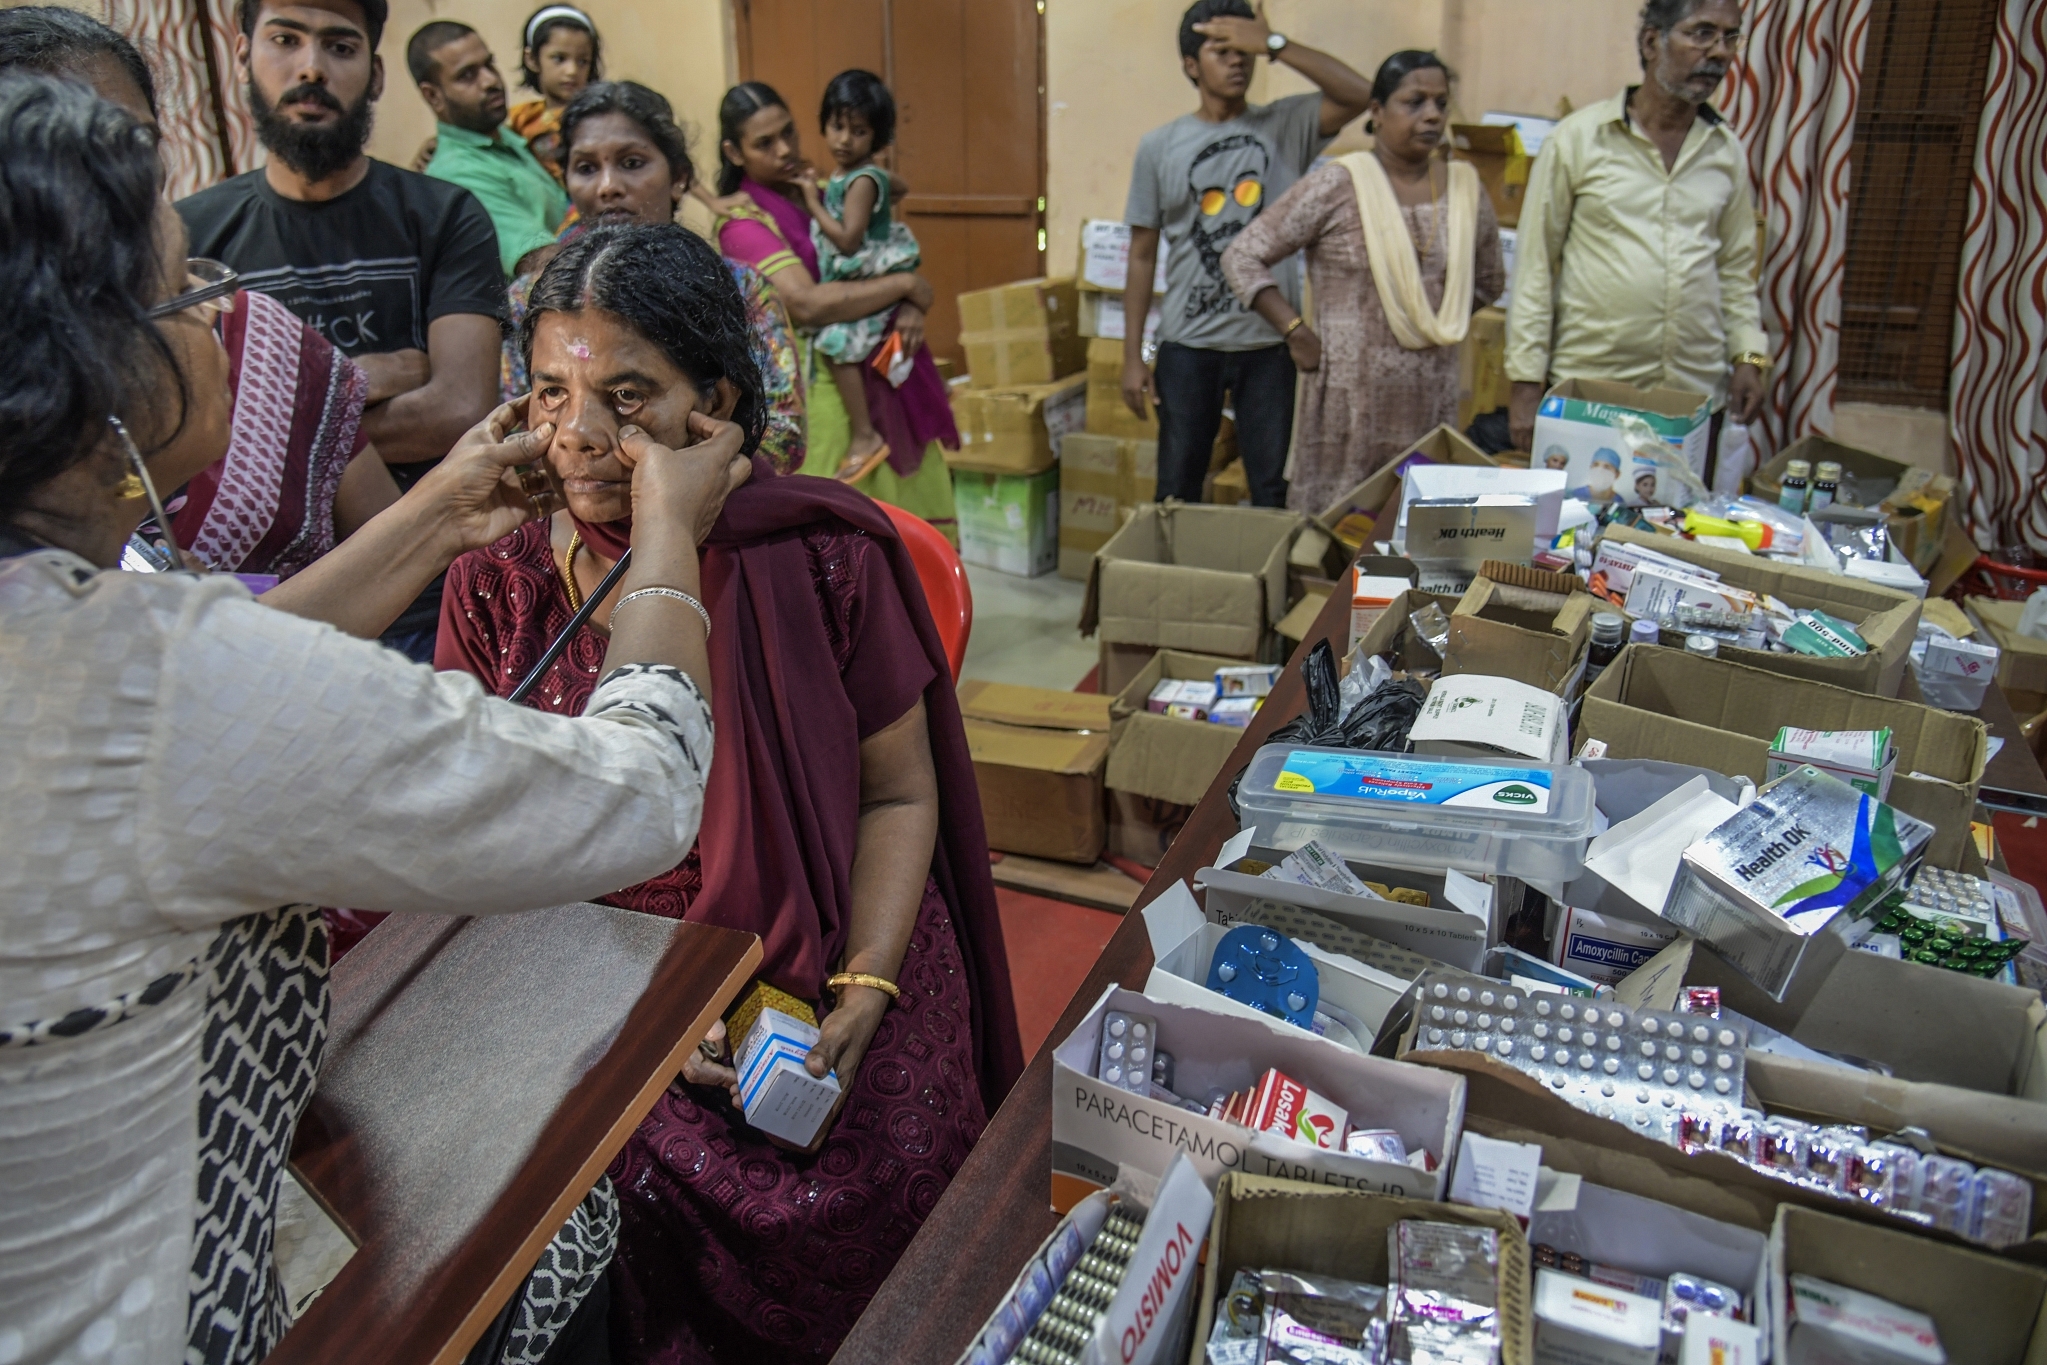 Residents seek treatment at a medical shelter in Chegannur relief camp in Kerala, India. (Atul Loke/Getty Images)&nbsp;